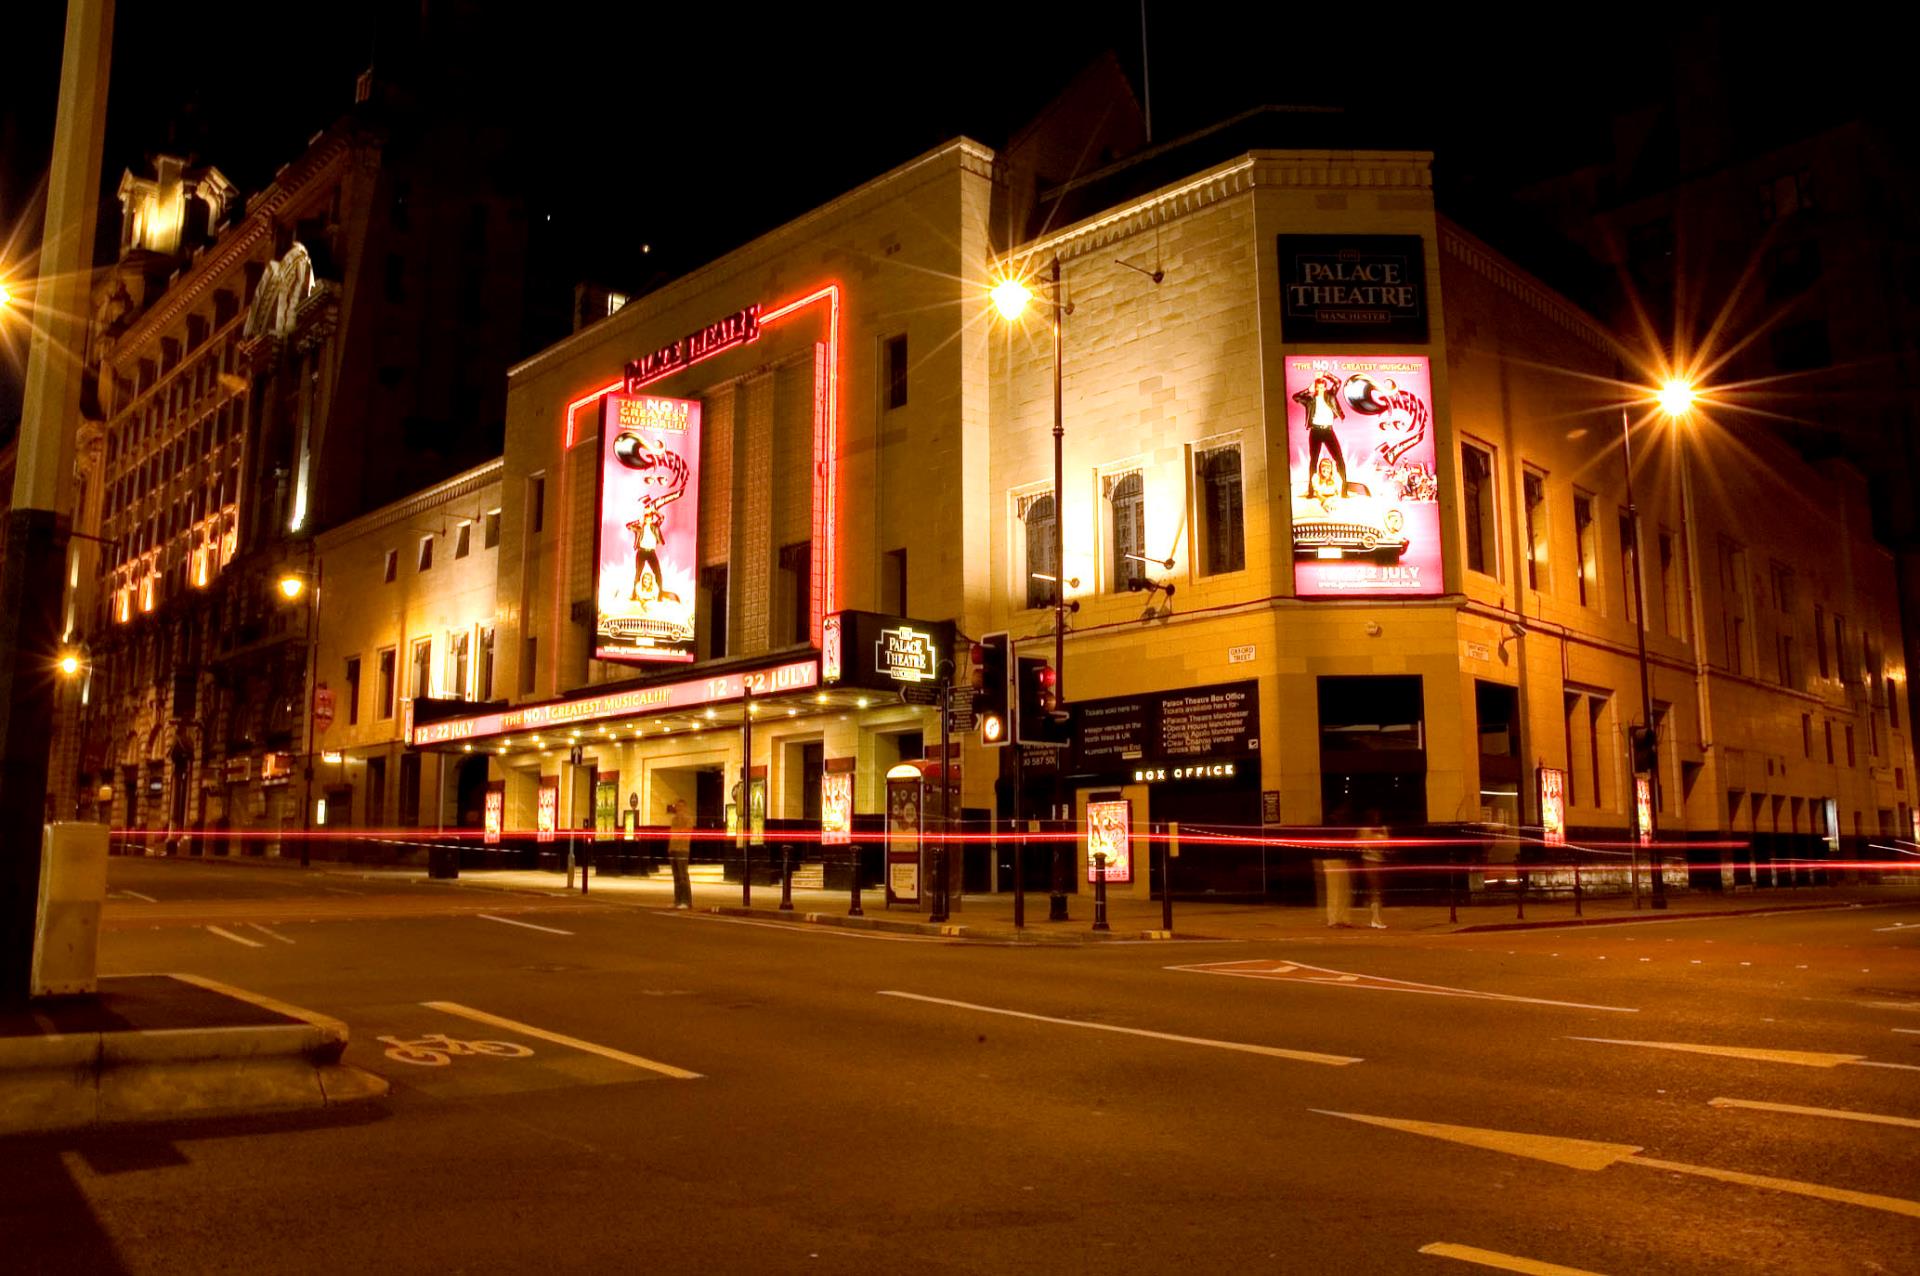 The Palace Theatre, M3 3HP